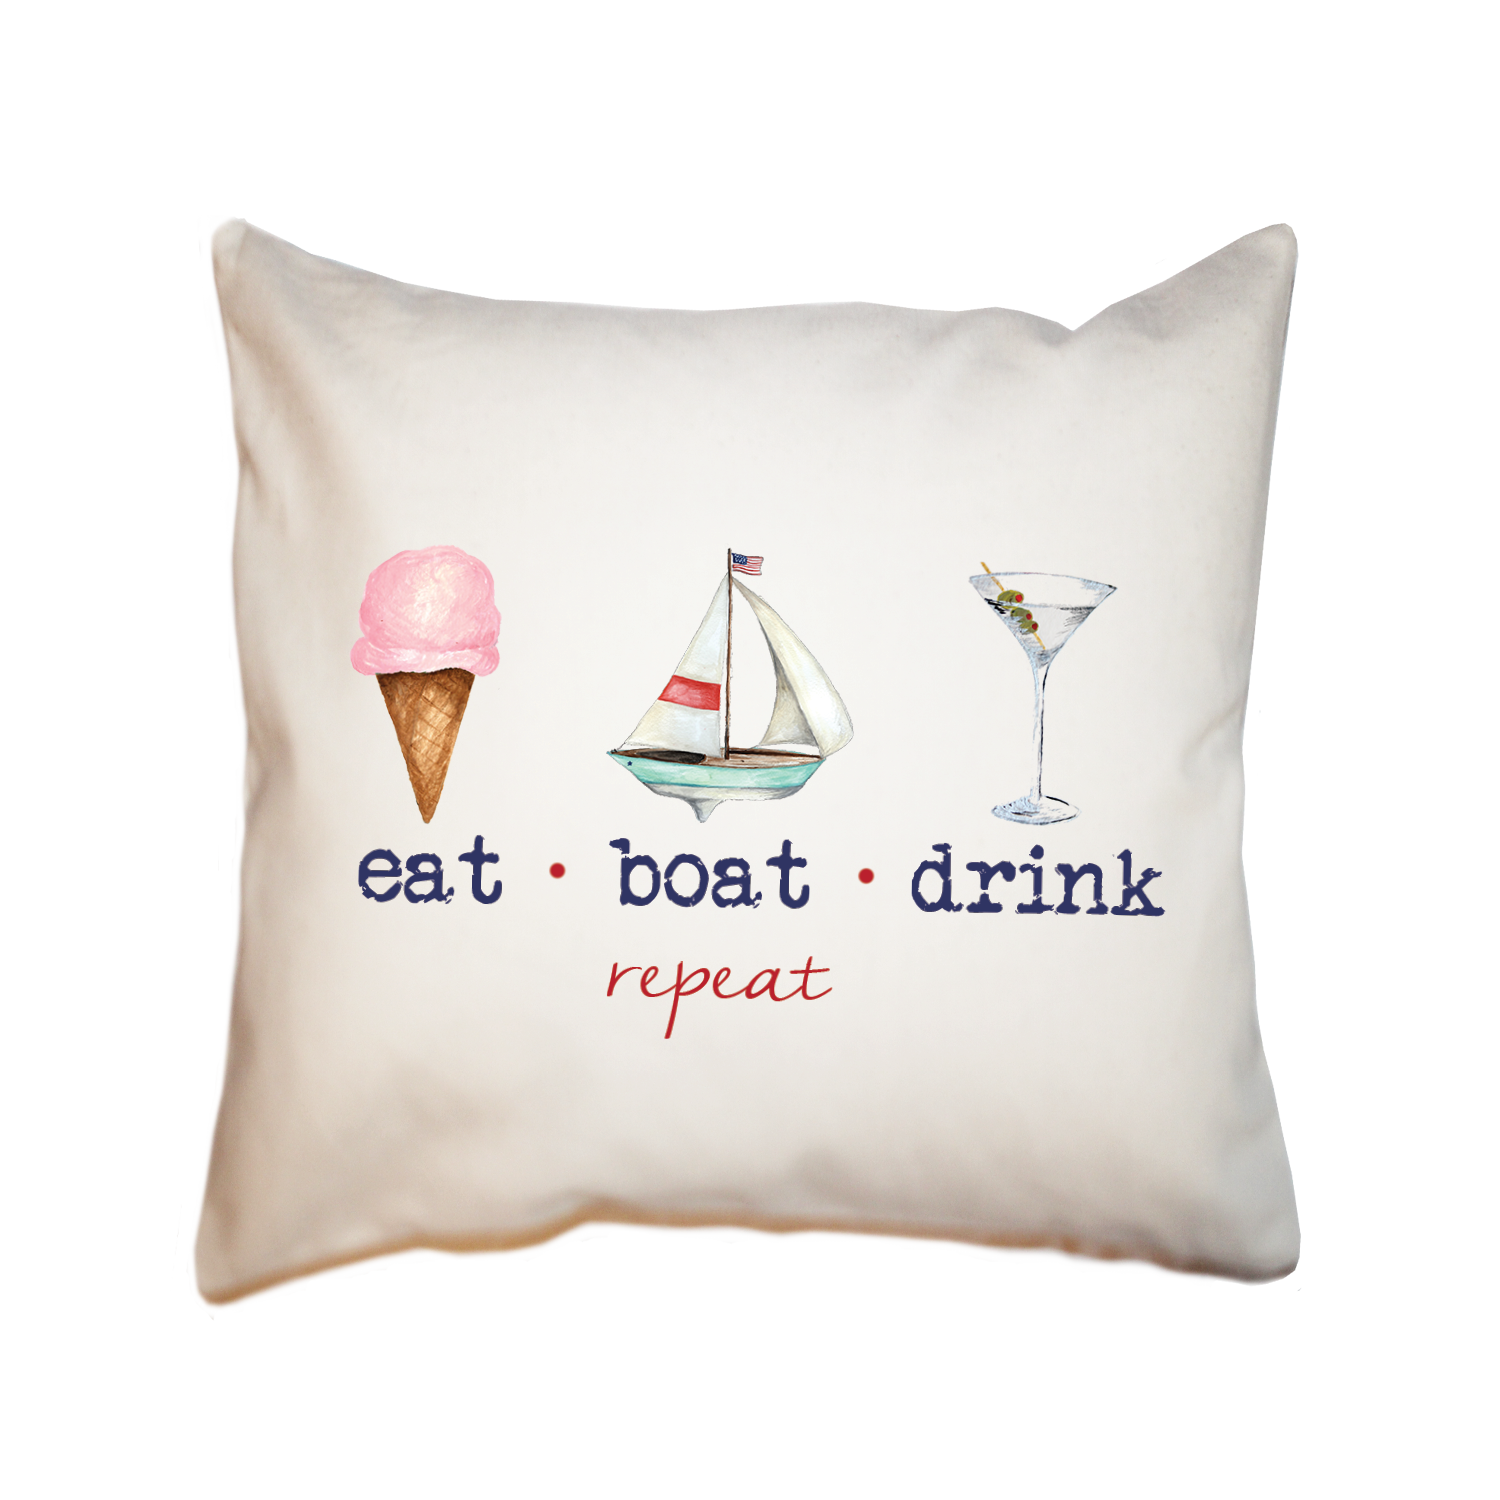 eat boat drink repeat square pillow